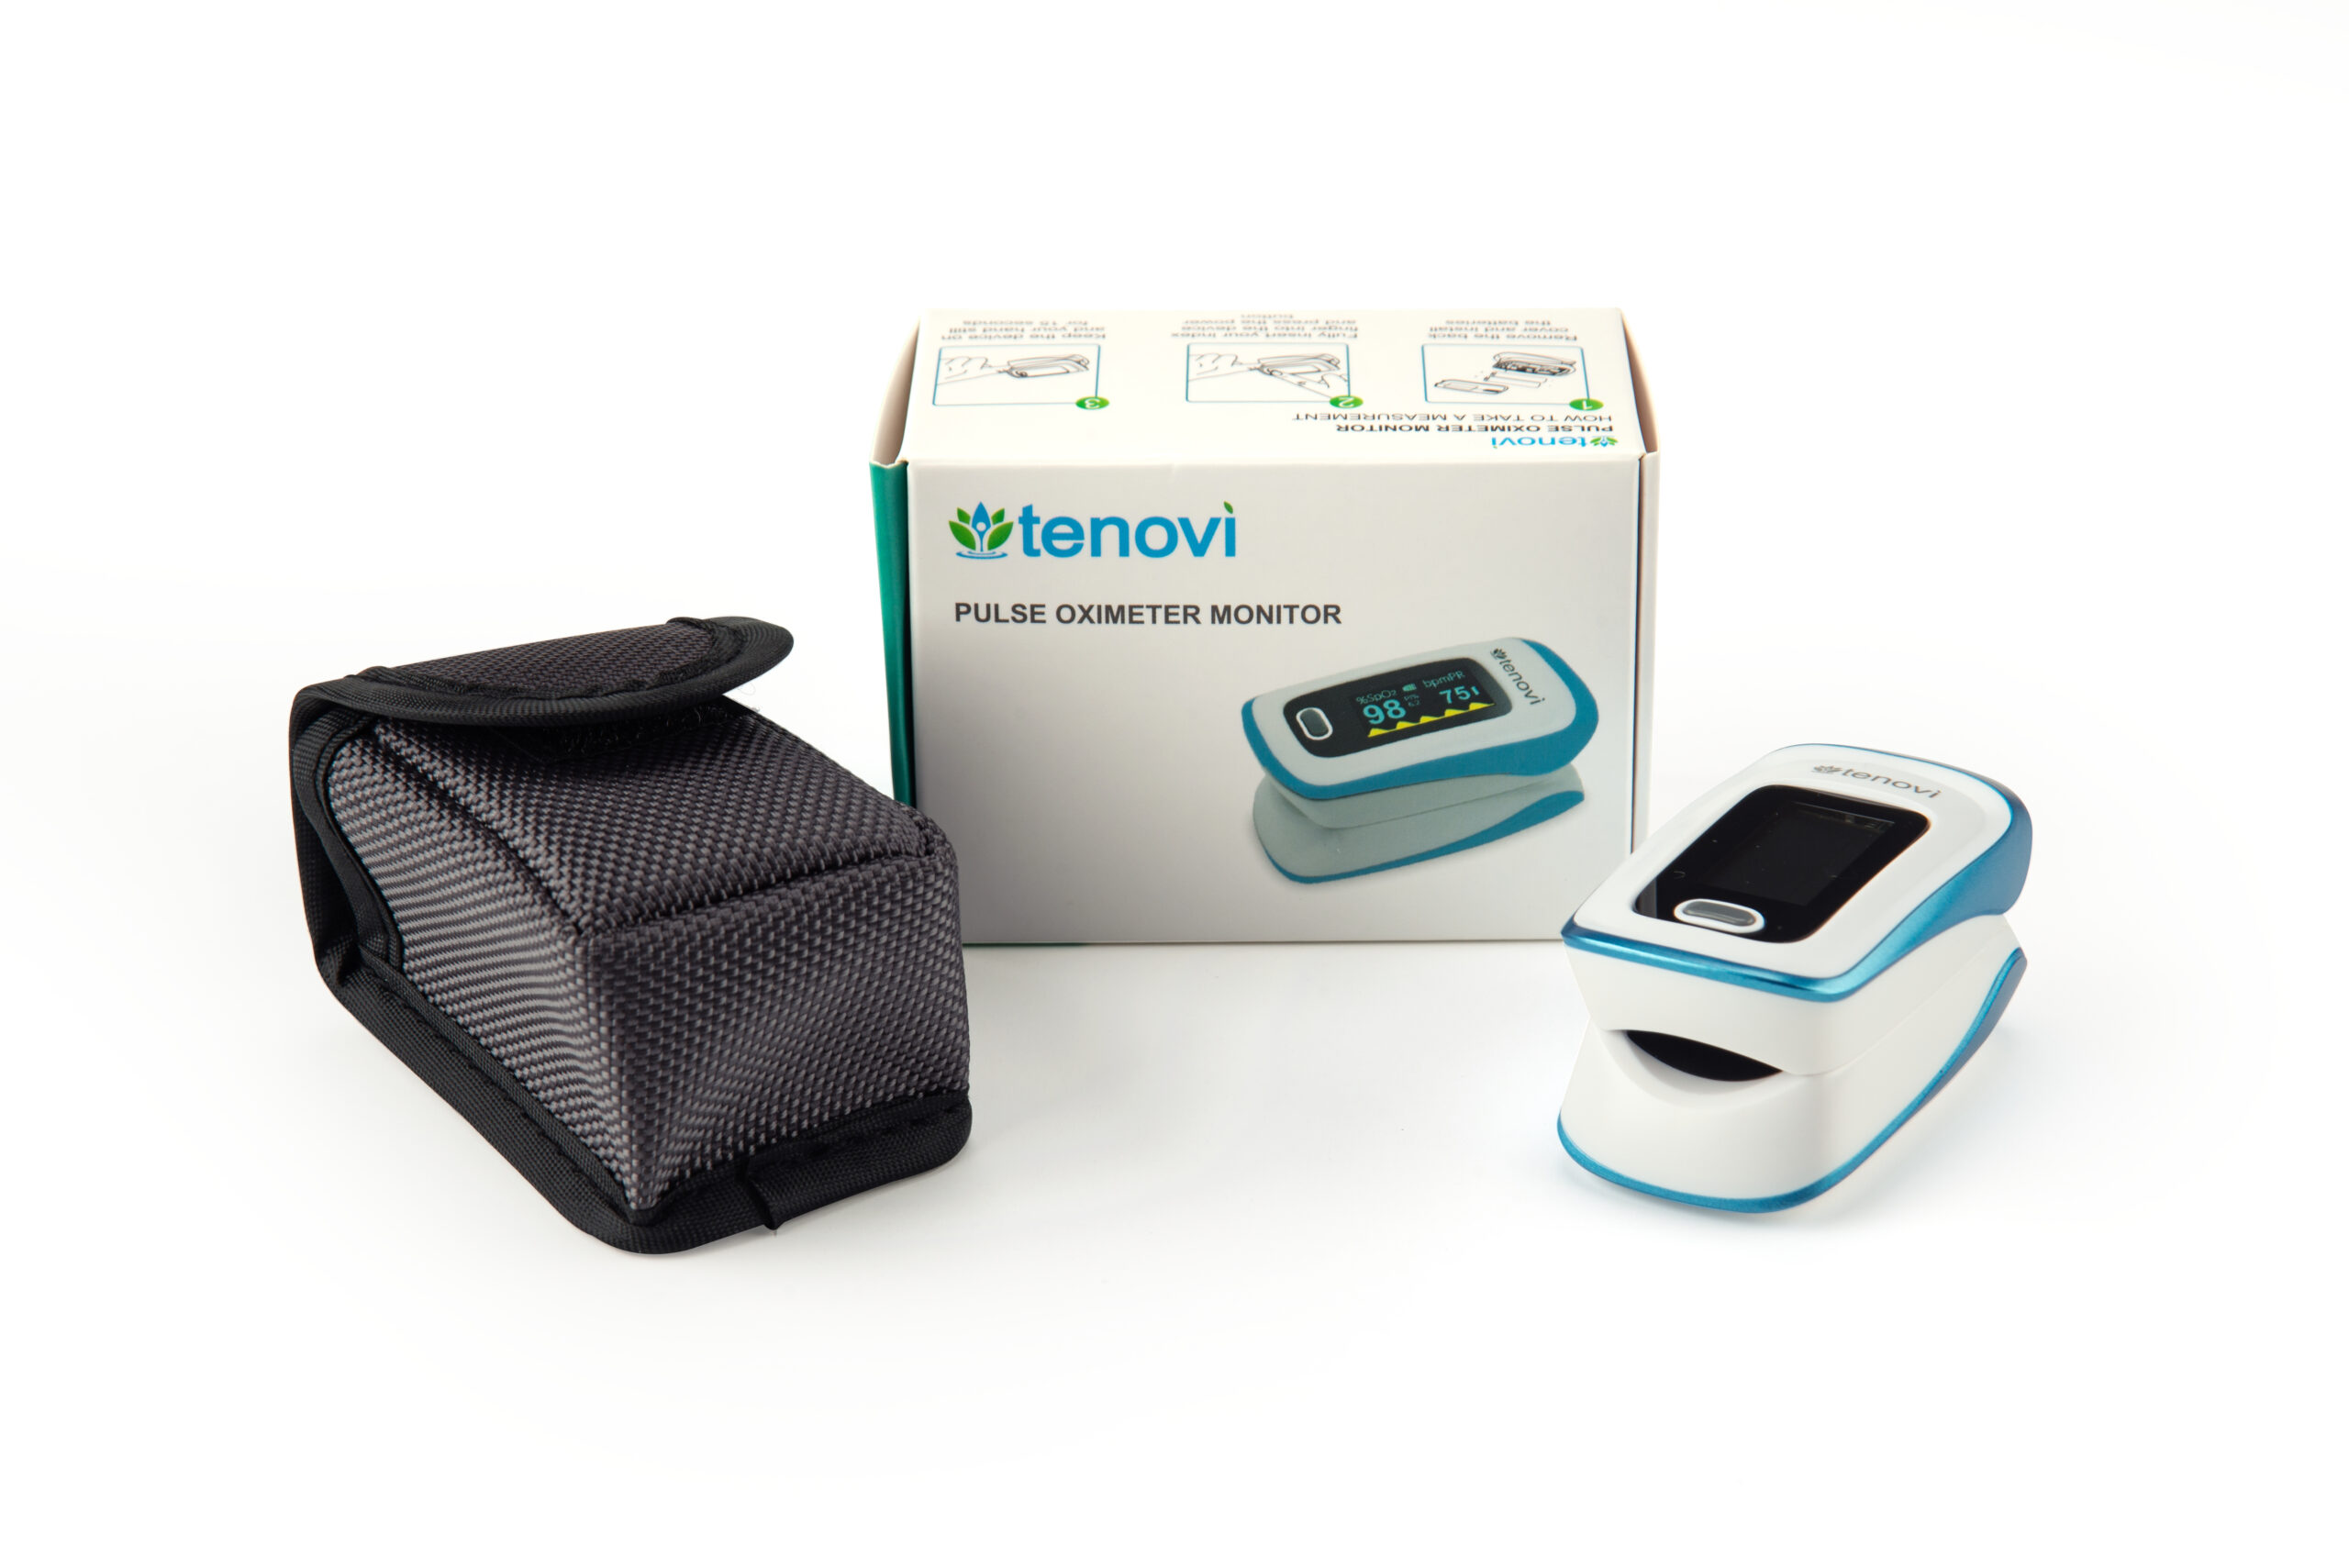 COPD remote patient monitoring is conducted with a pulse oximeter